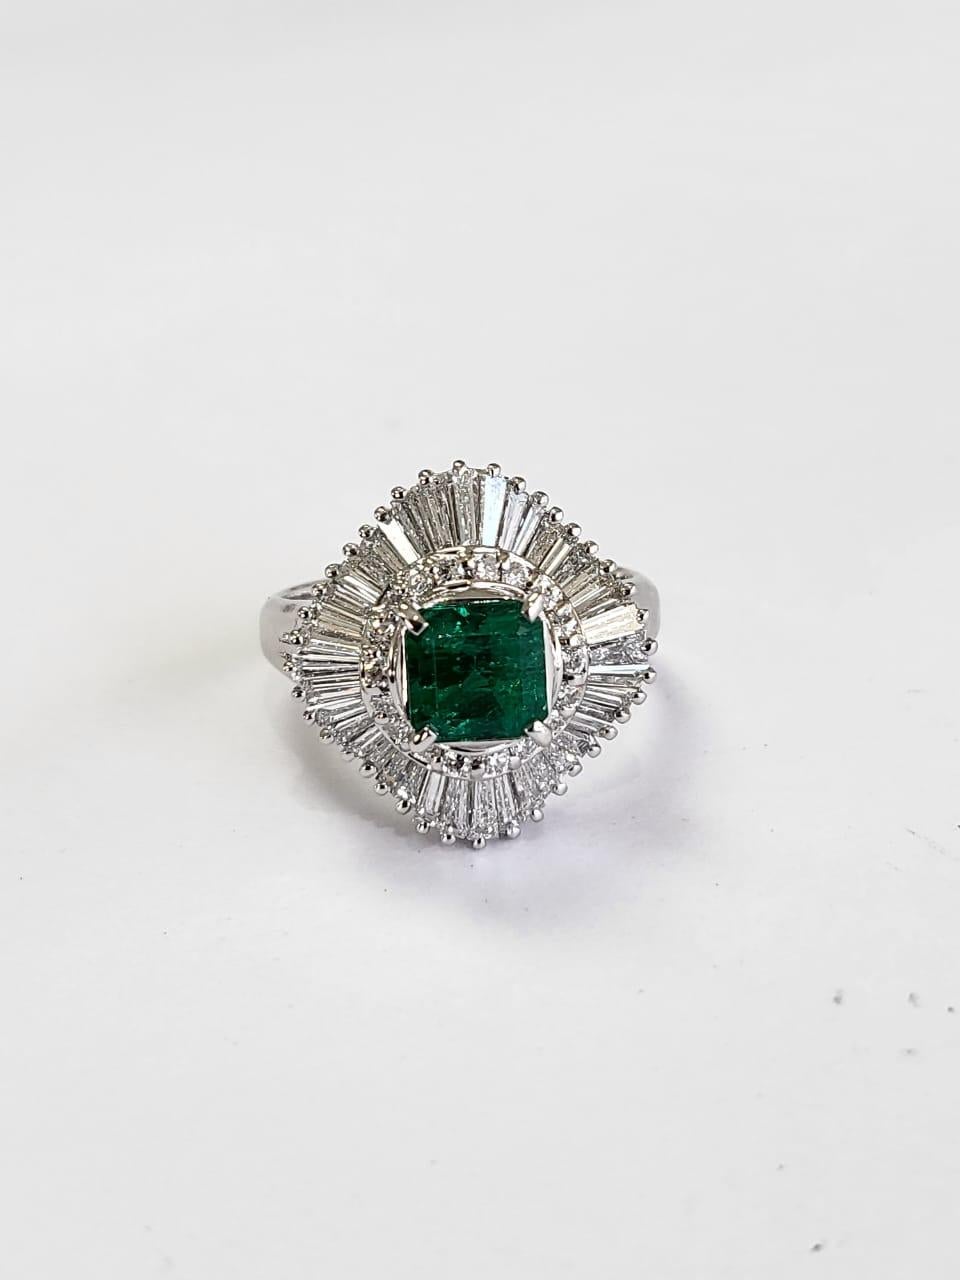 A very gorgeous and beautiful, modern style, Emerald Ring set in Platinum 900 & Diamonds. The weight of the Emerald is 1.09 carats. The Emerald is natural, without any treatment and is of Colombian origin. The Diamonds weight is 1.275 carats. Net